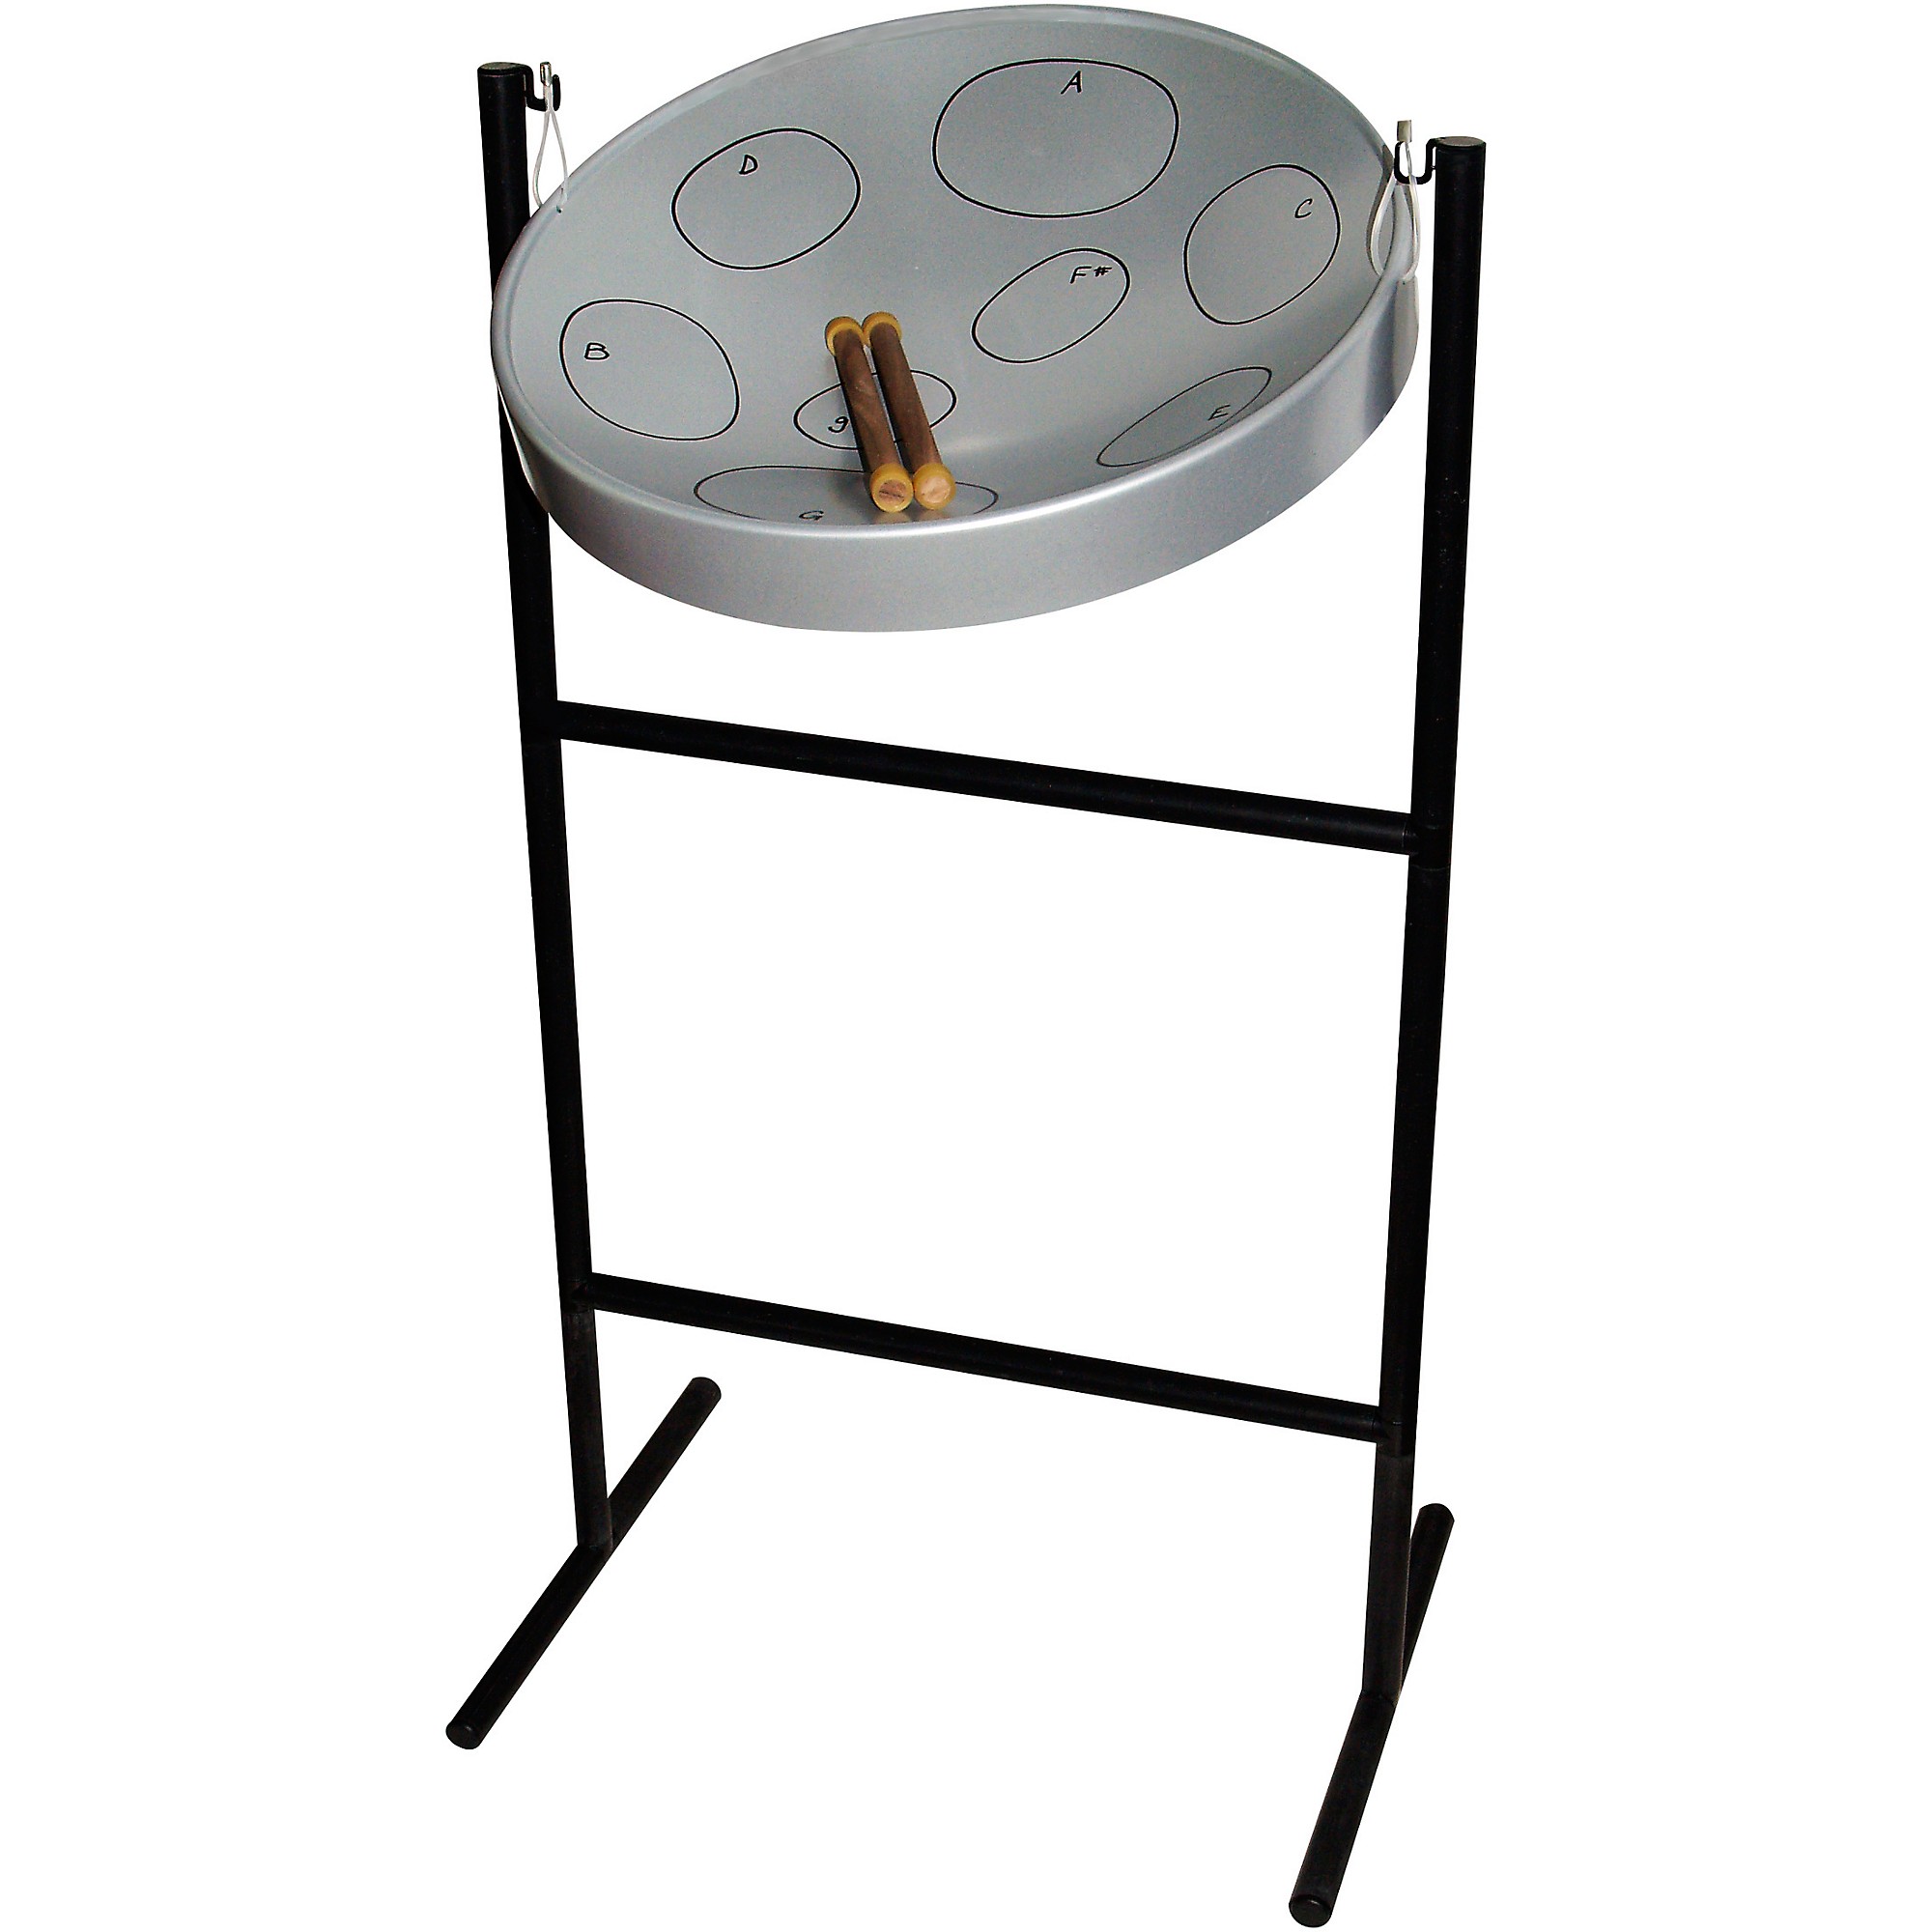 Panyard JJ Jumbie Jam Steel Ready to Play Kit-Silver G-Major with Table Top  Stand-Made in USA (W1084)